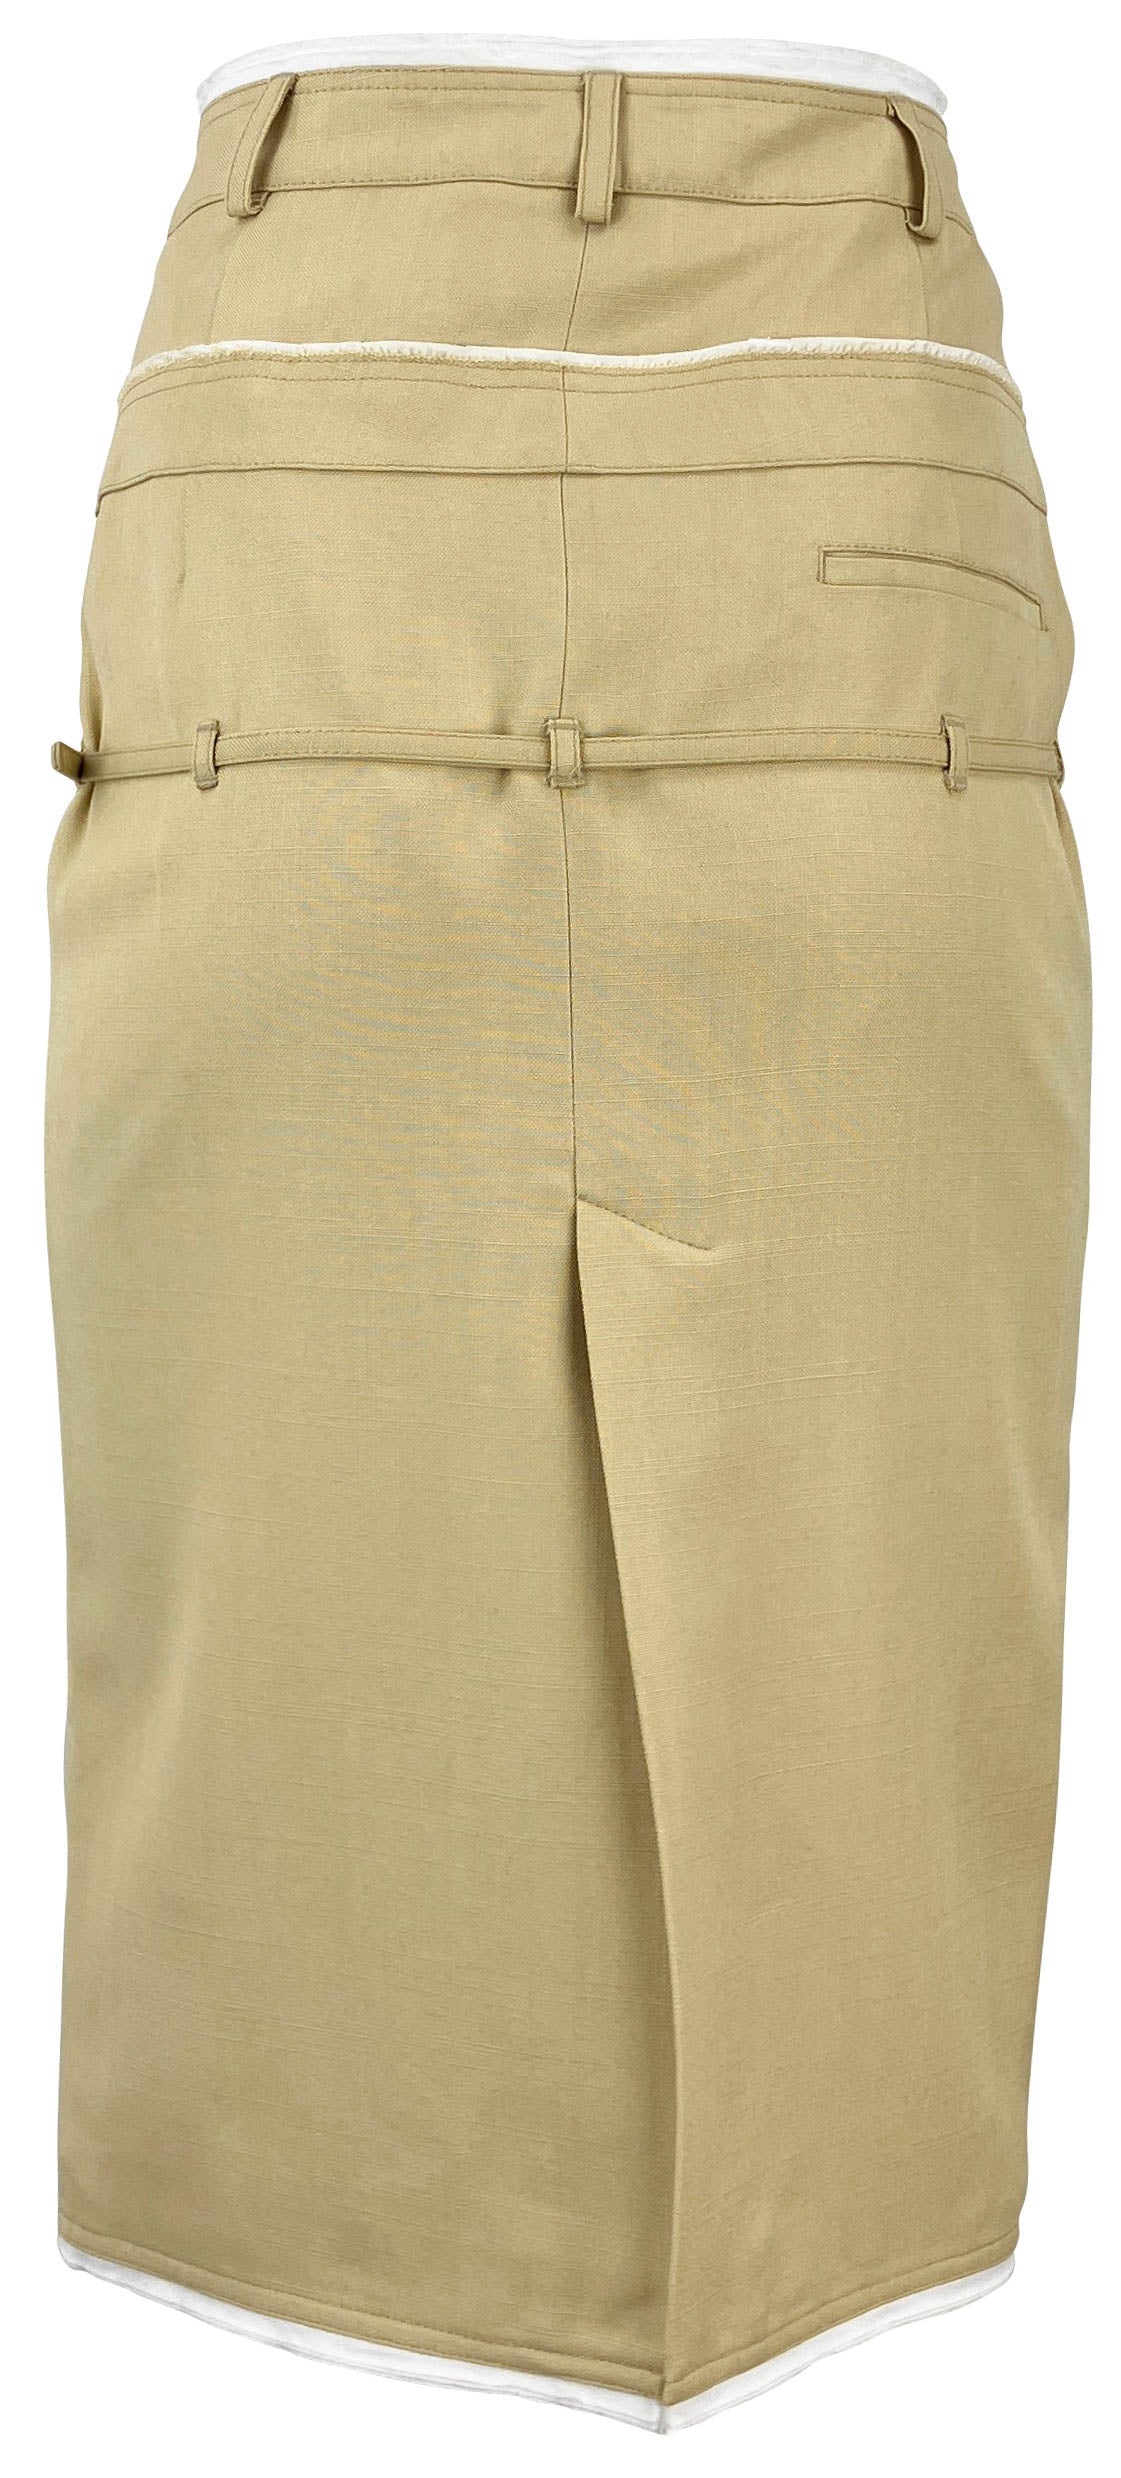 Jacquemus La Jupe Caraco Pencil Skirt in Neutrals - Discounts on Jacquemus at UAL